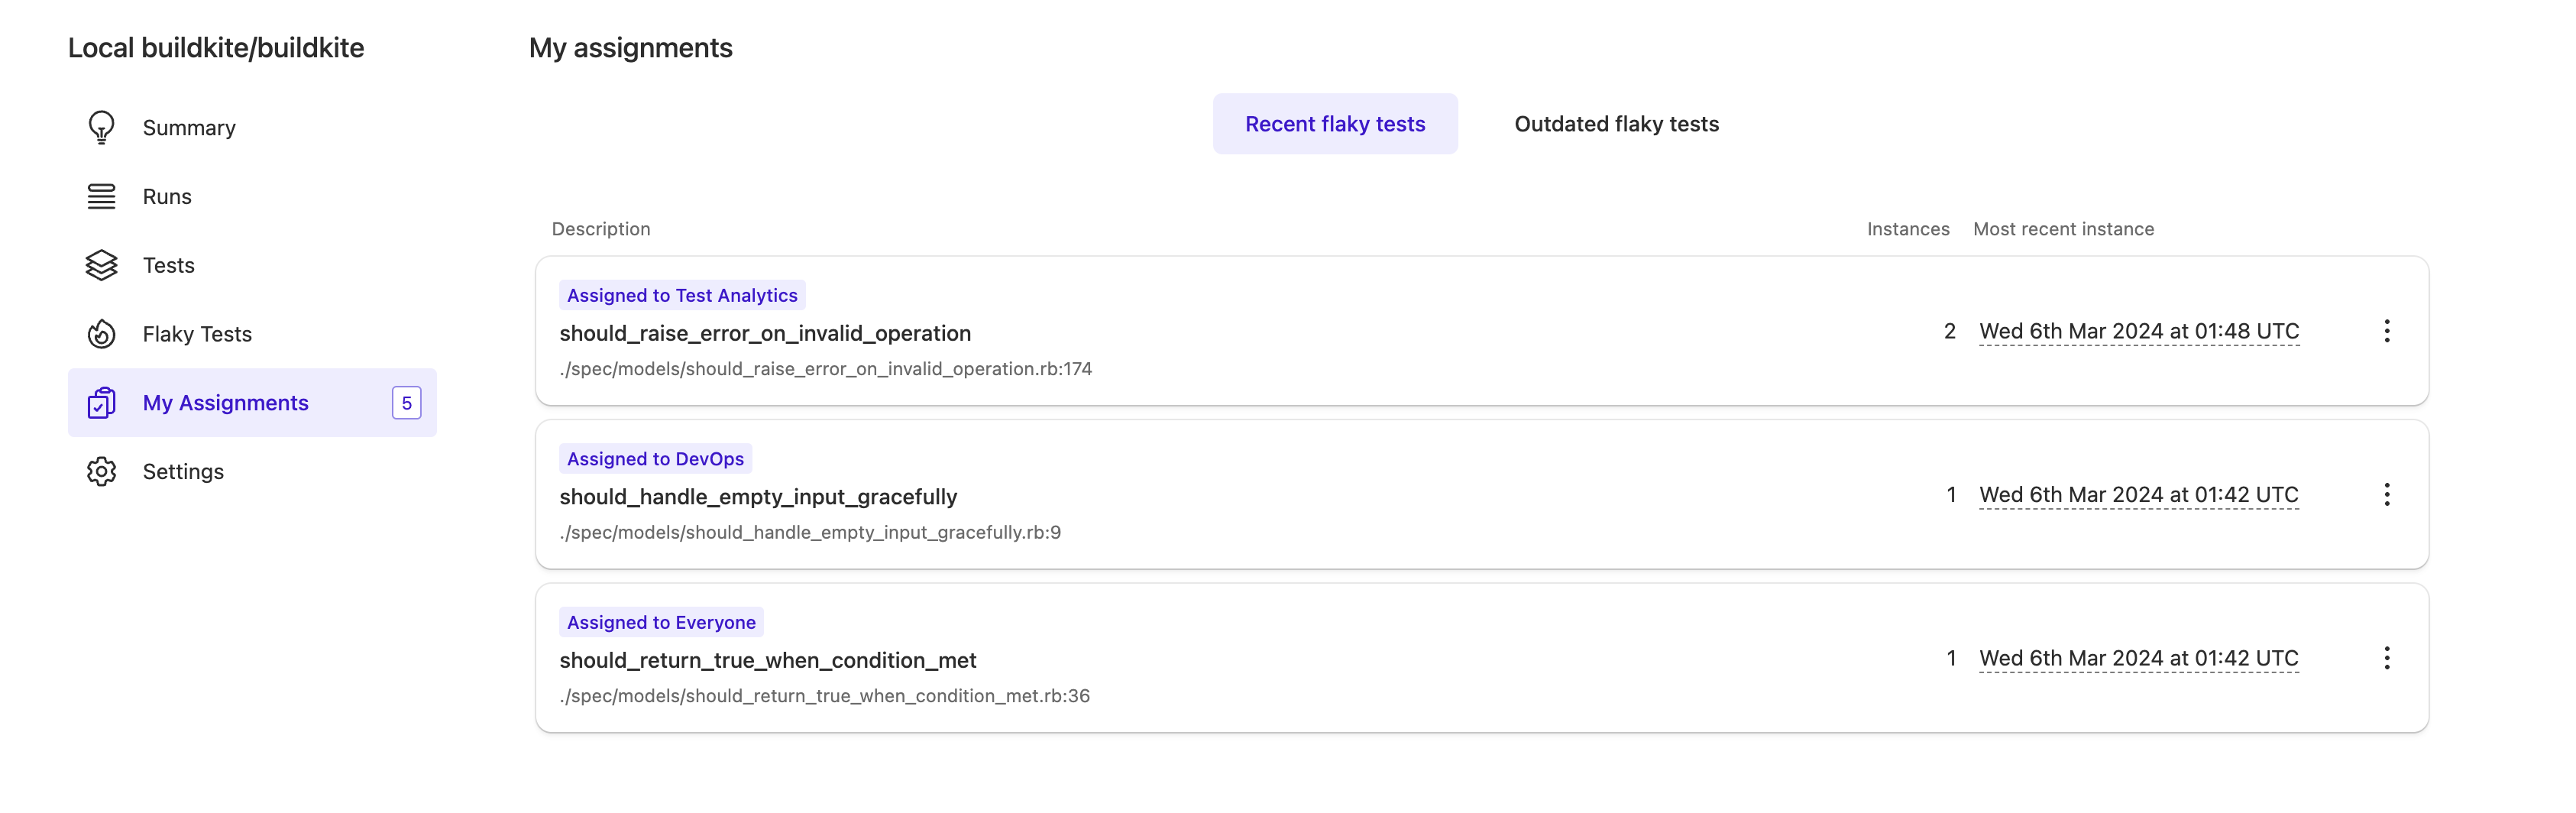 Test Analytics shows the flaky tests assigned to a user